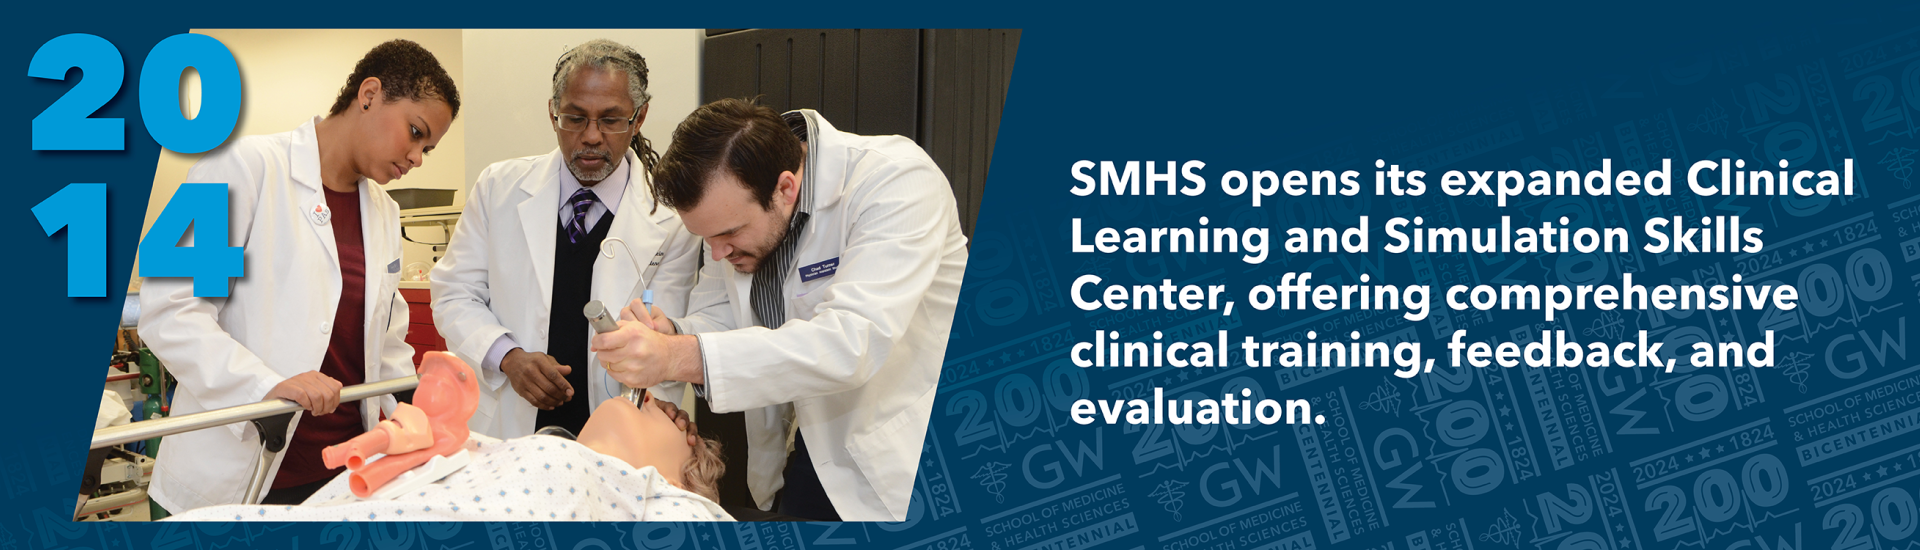 2014: SMHS opens its expanded Clinical Learning and Simulation Skills Center, offering comprehensive clinical training, feedback, and evaluation.